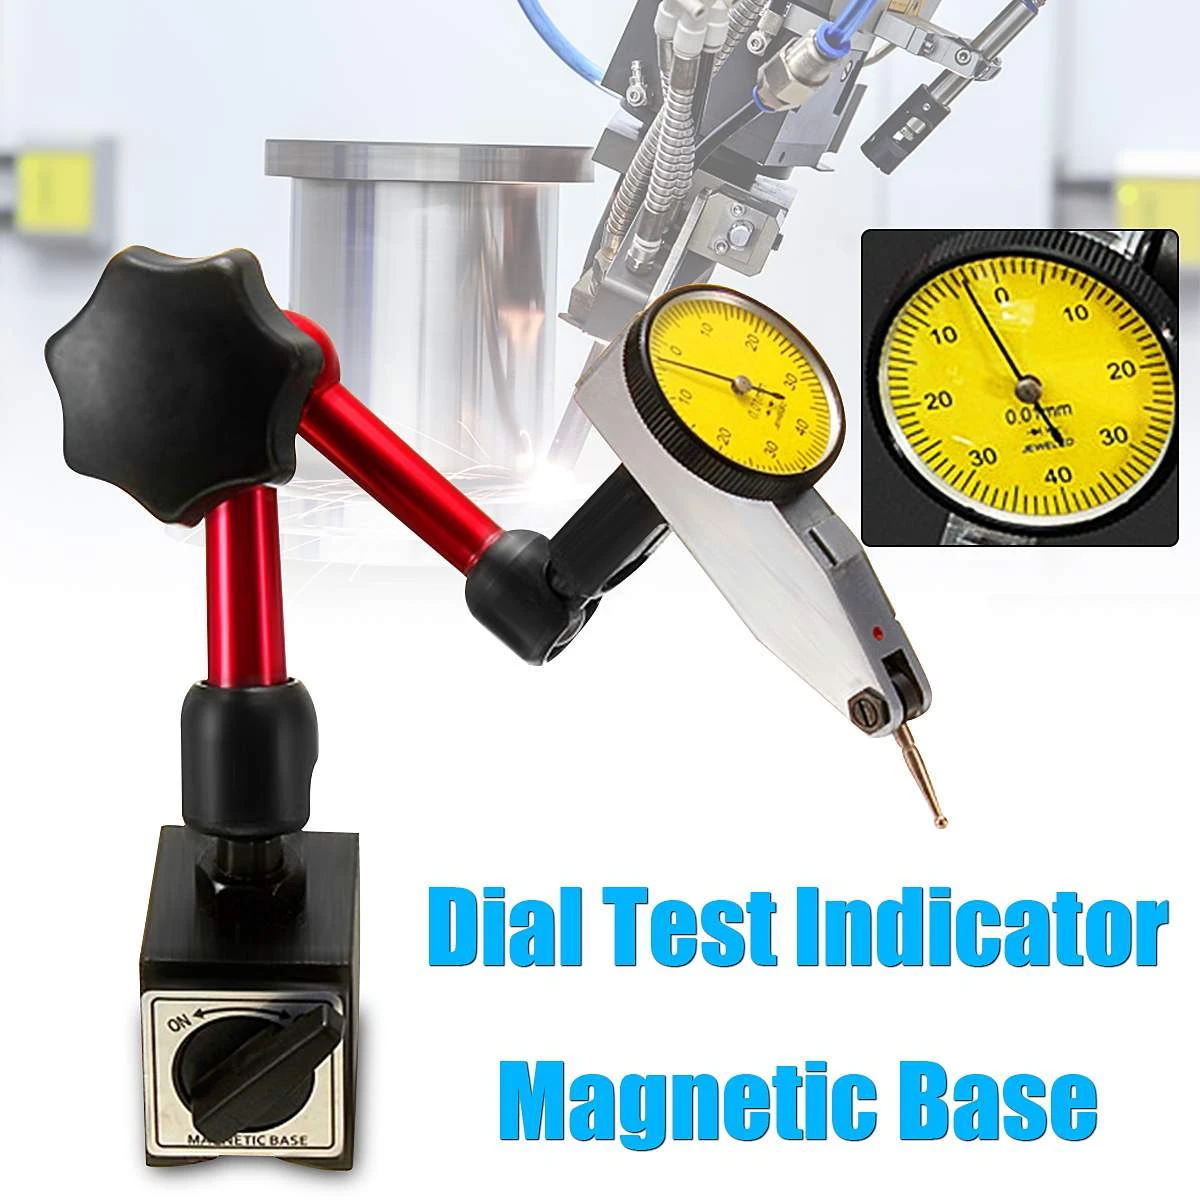 Mini Universal Flexible Dial Test Indicator Magnetic Base Holder Stand Dial Test Indicator Tool Magnetic Correction Gauge Stand